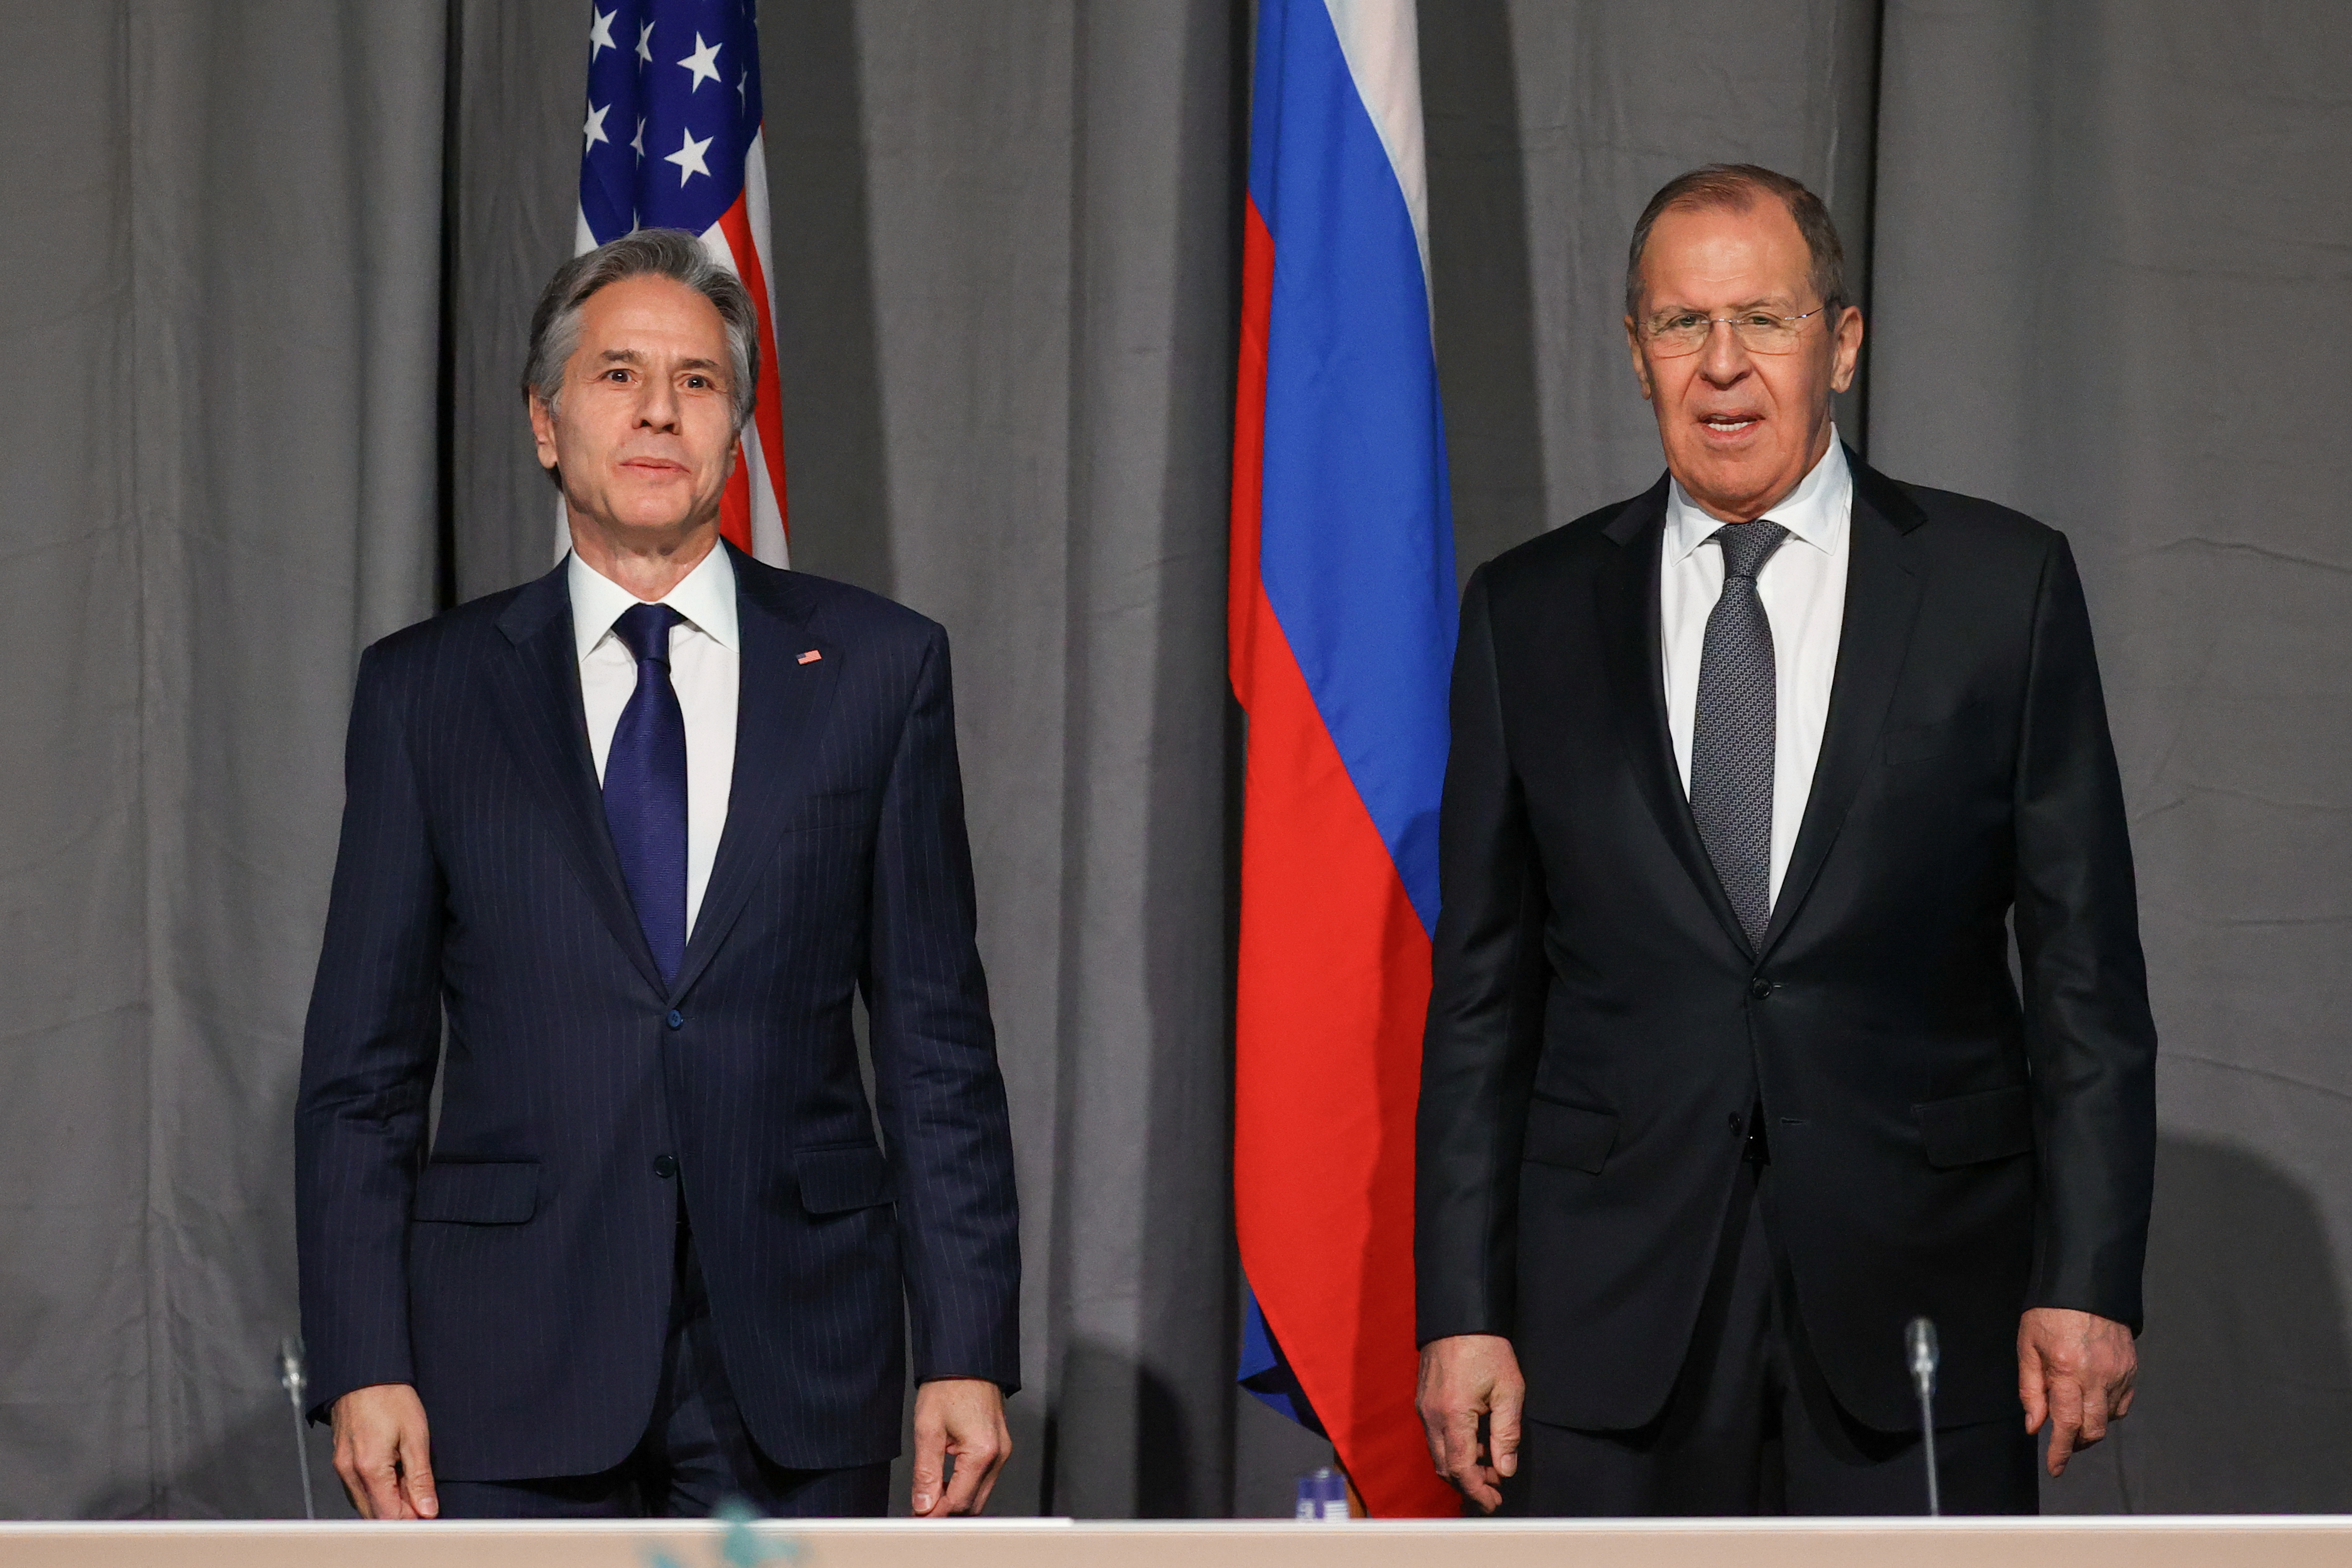 Russian Foreign Minister Sergei Lavrov attends a meeting with U.S. Secretary of State Antony Blinken on the sidelines of the OSCE Ministerial Council in Stockholm, Sweden, December 2, 2021. Russian Foreign Ministry/Handout via REUTERS 